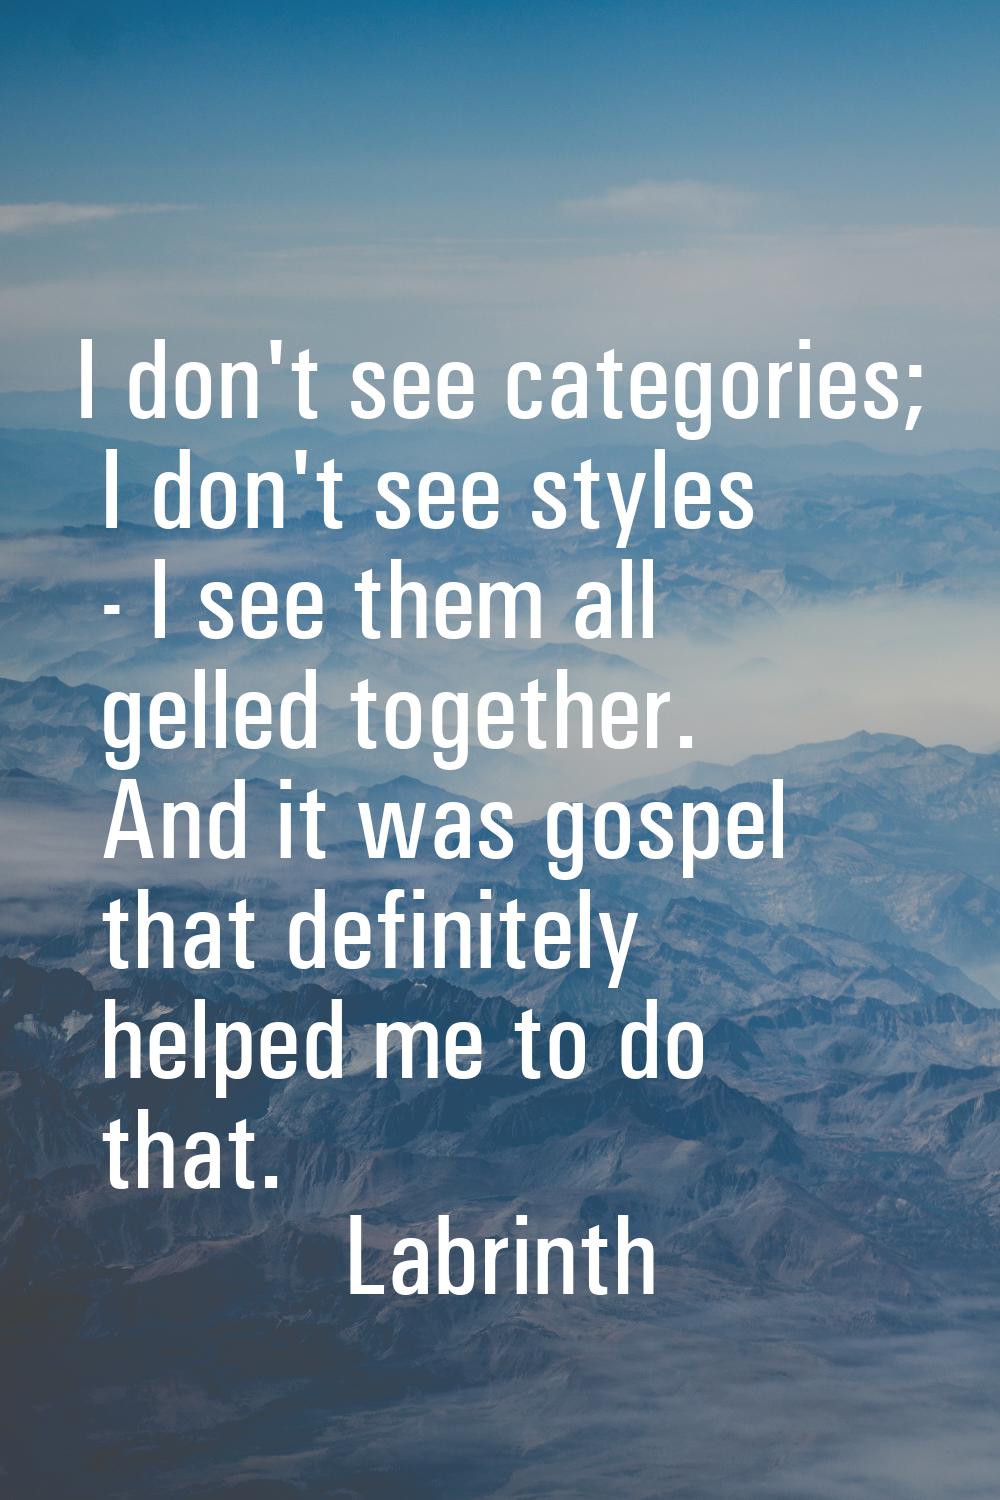 I don't see categories; I don't see styles - l see them all gelled together. And it was gospel that